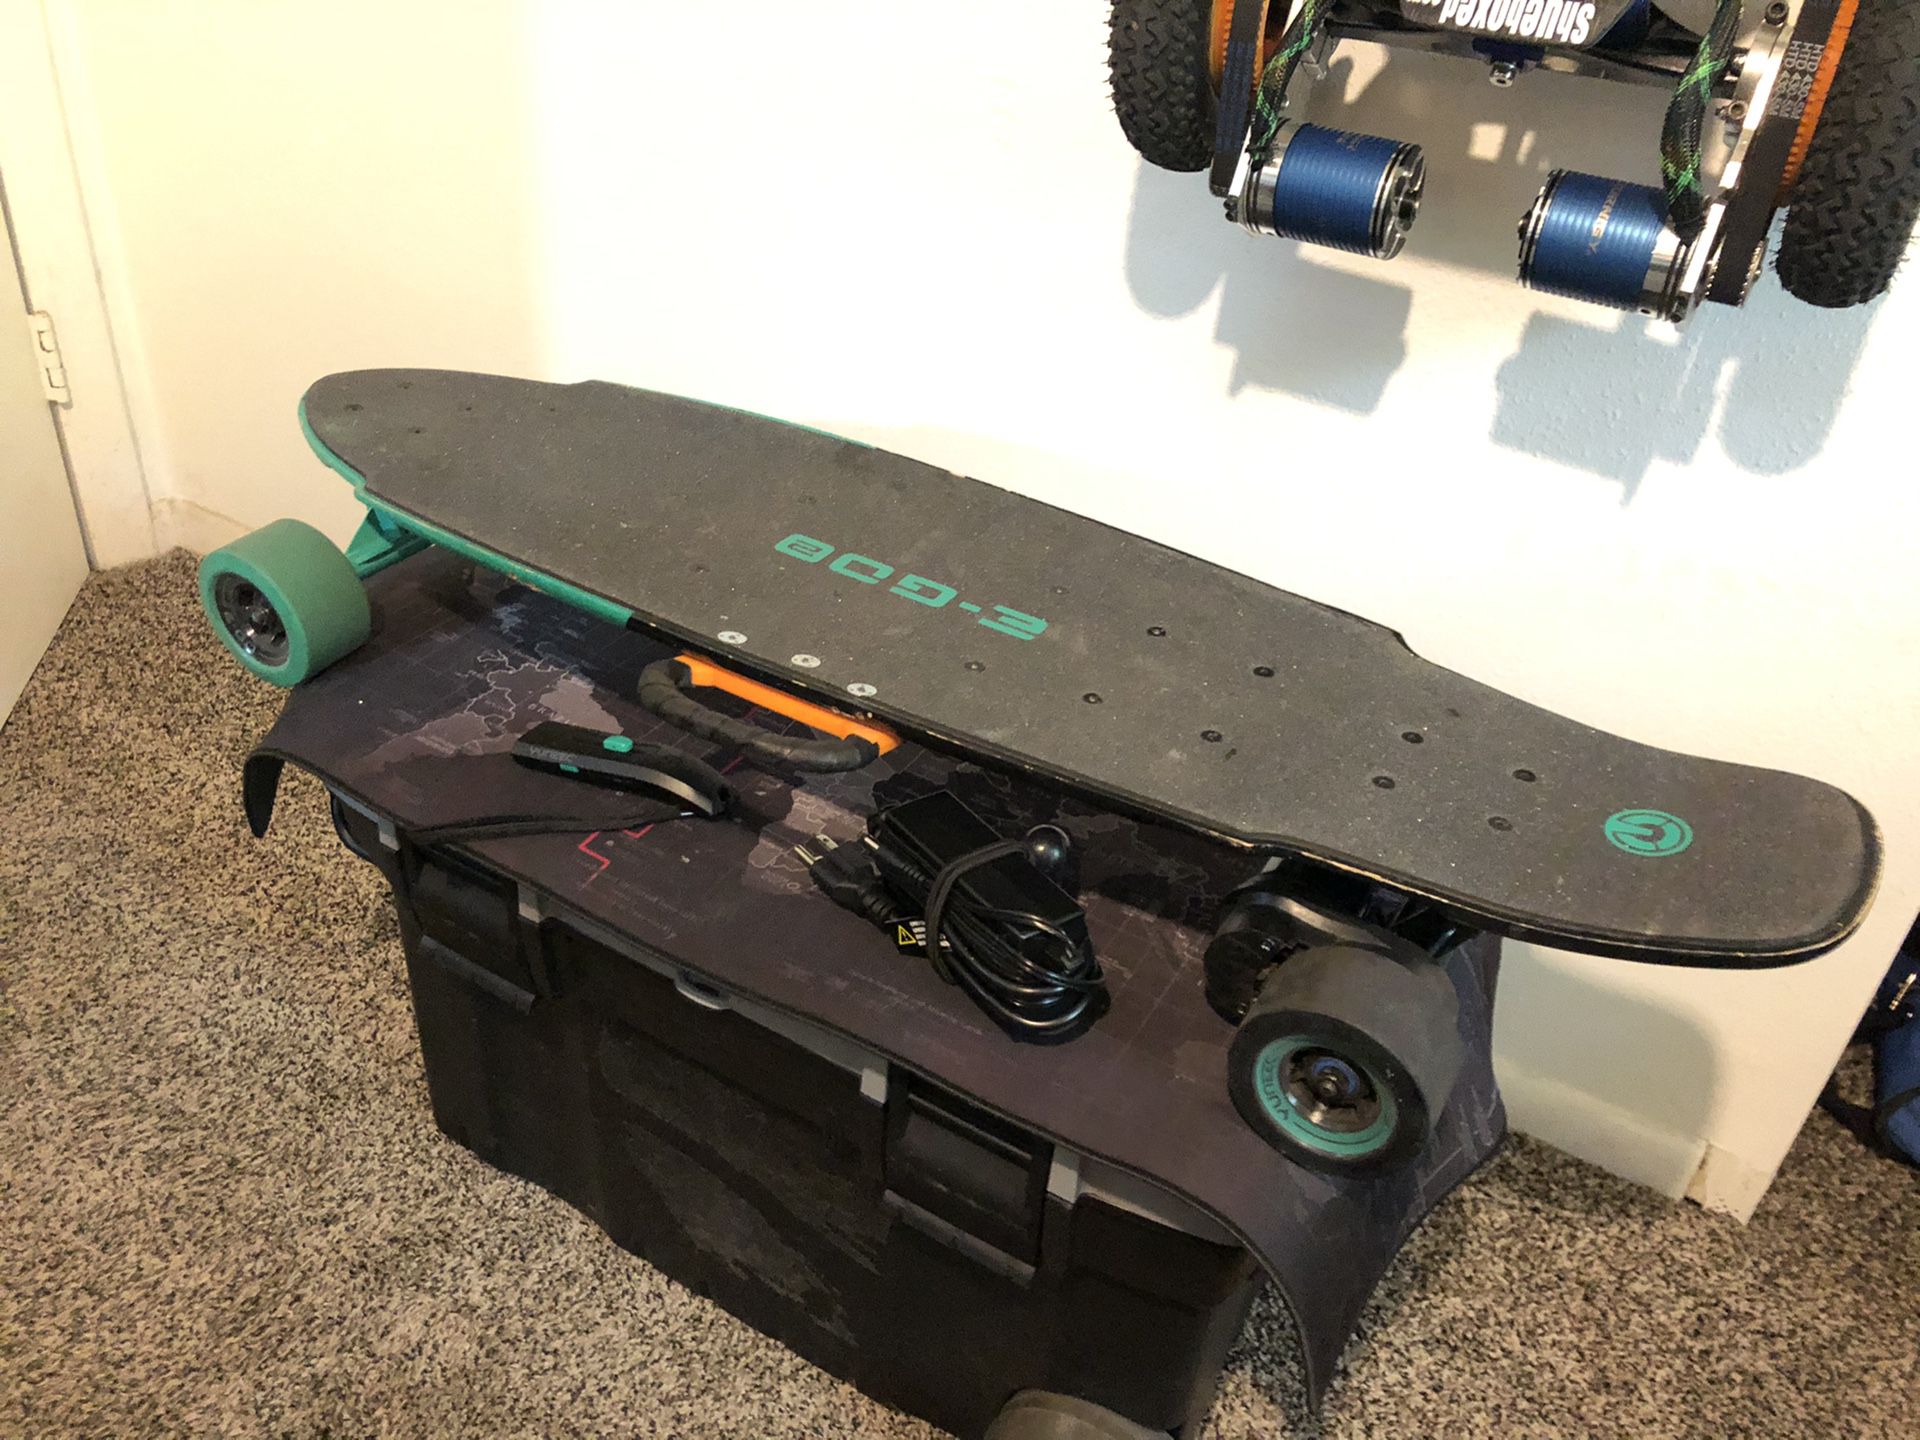 YUNEEC EGO-2 Electric Longboard Skateboard W/Remote Control and Charger